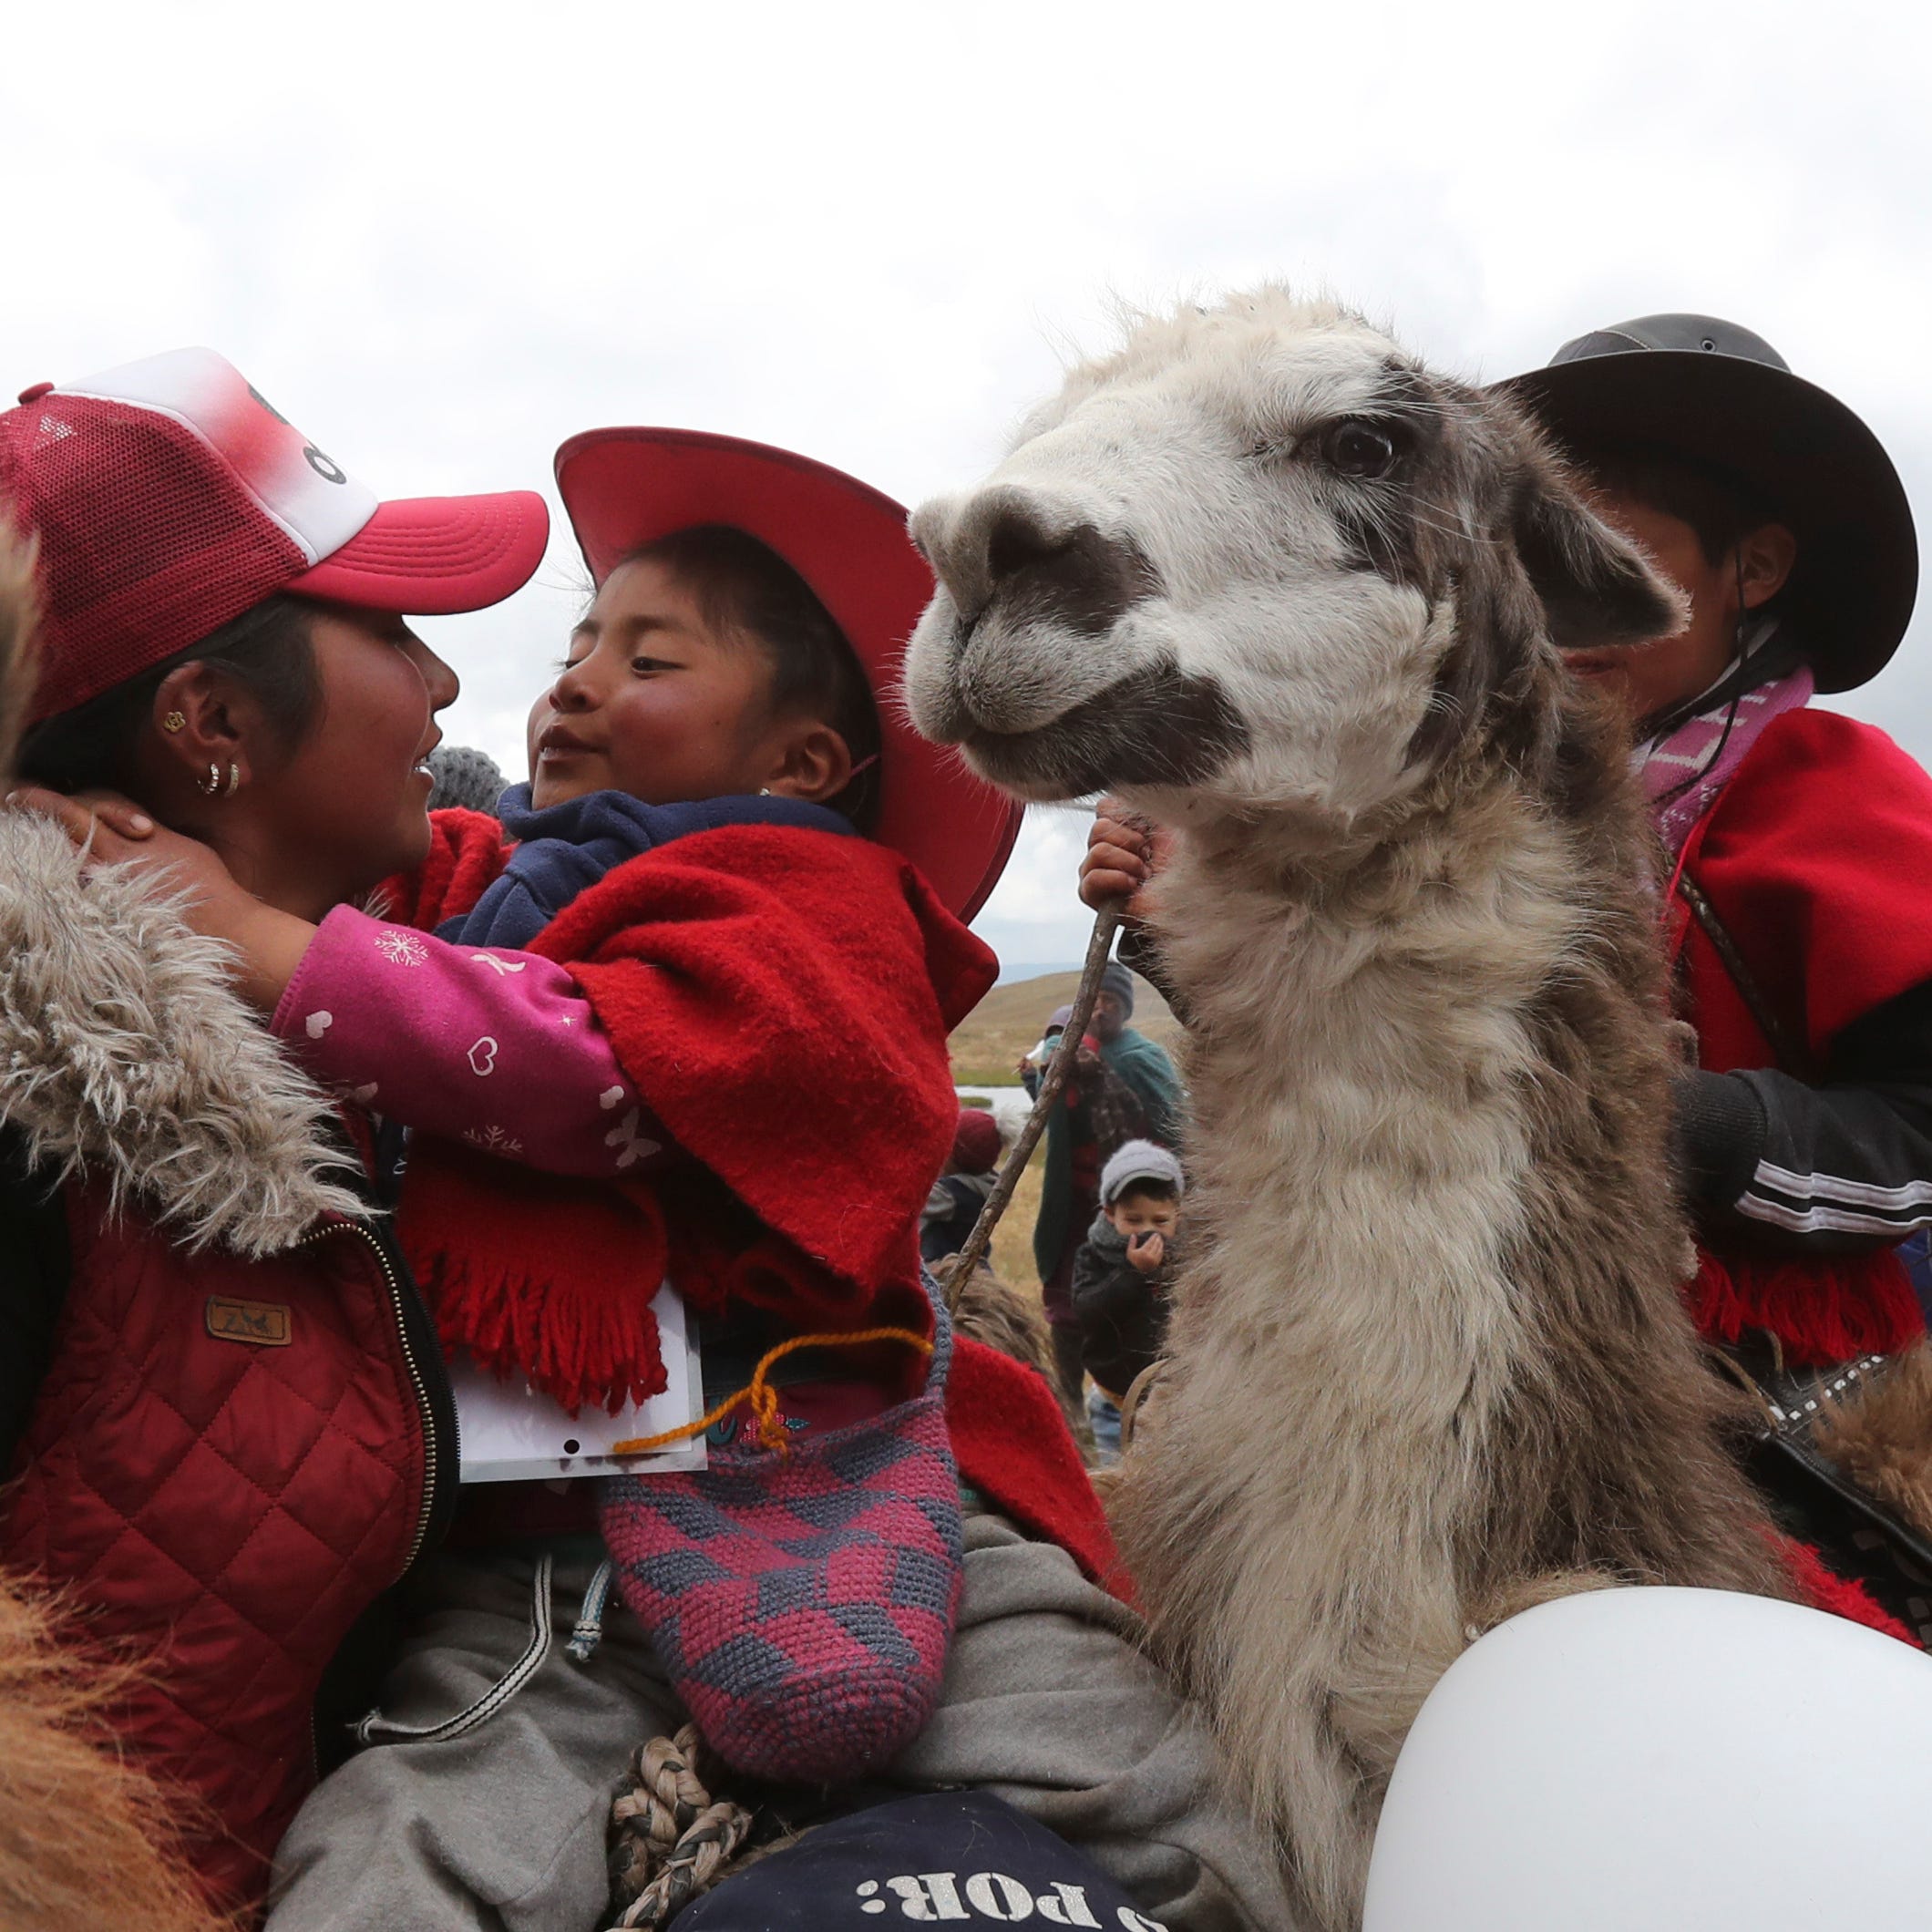 A mother embraces her child after he raced his llama at the Llanganates National Park in Ecuador on February 8, 2020. Wooly llamas, an animal emblematic of the Andean mountains in South America, become the star for a day each year when Ecuadoreans dress up their prized animals for children to ride them in 500-meter races.